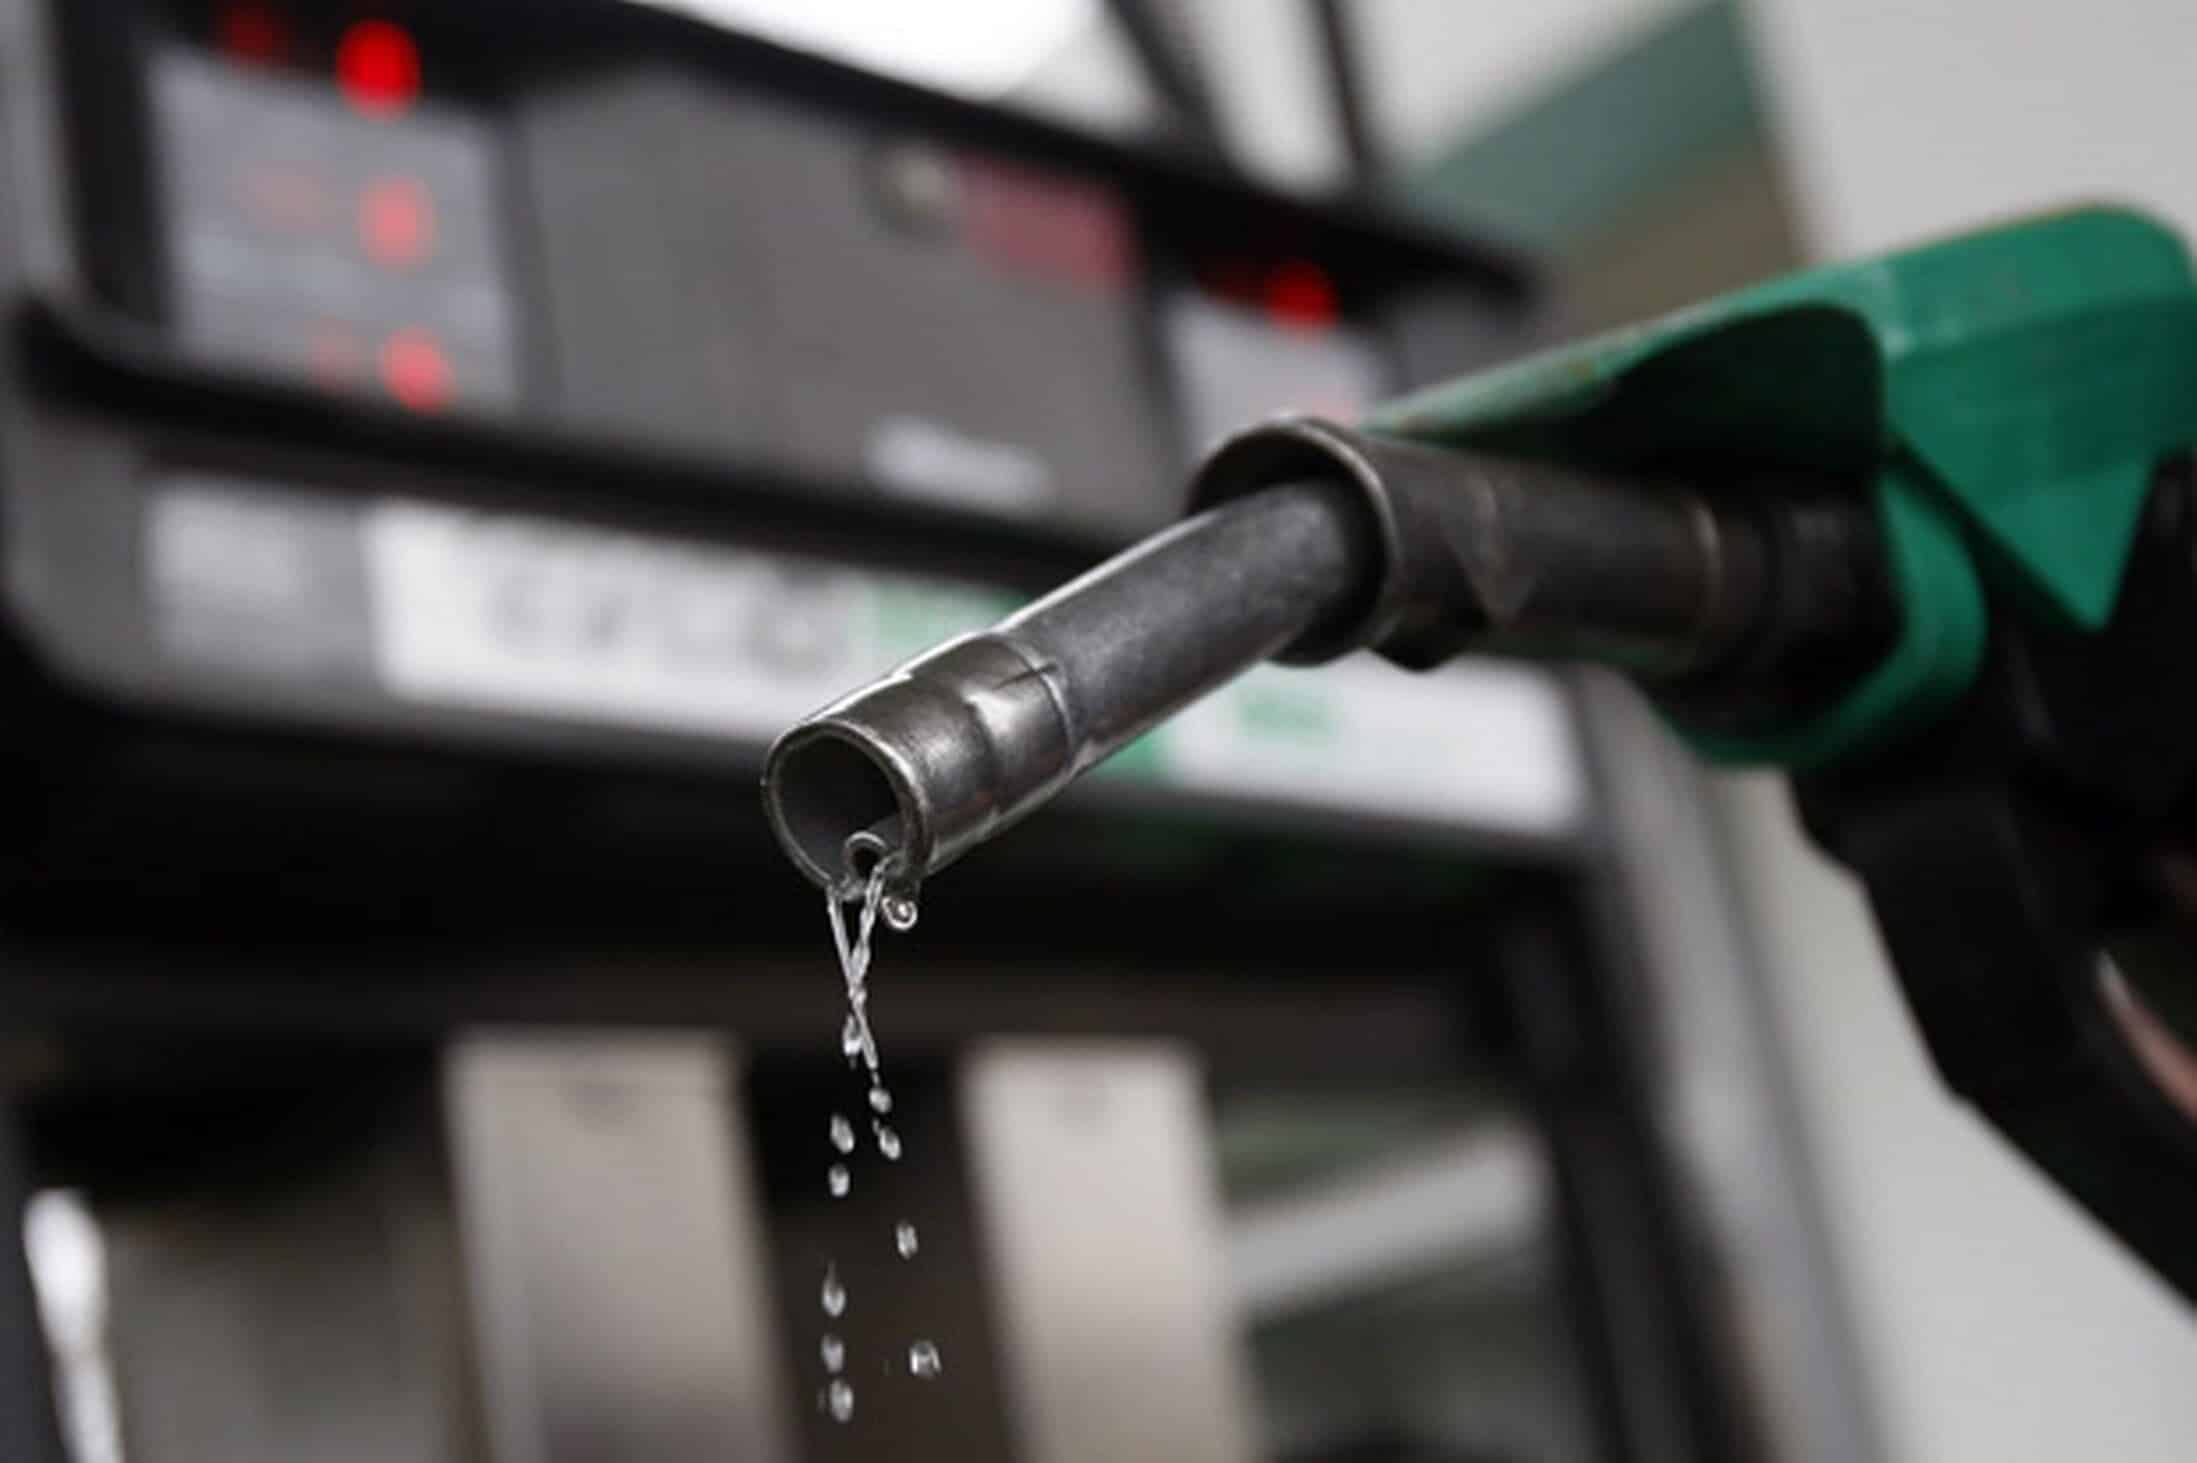 Saudi Aramco cuts local fuel prices for May 2020